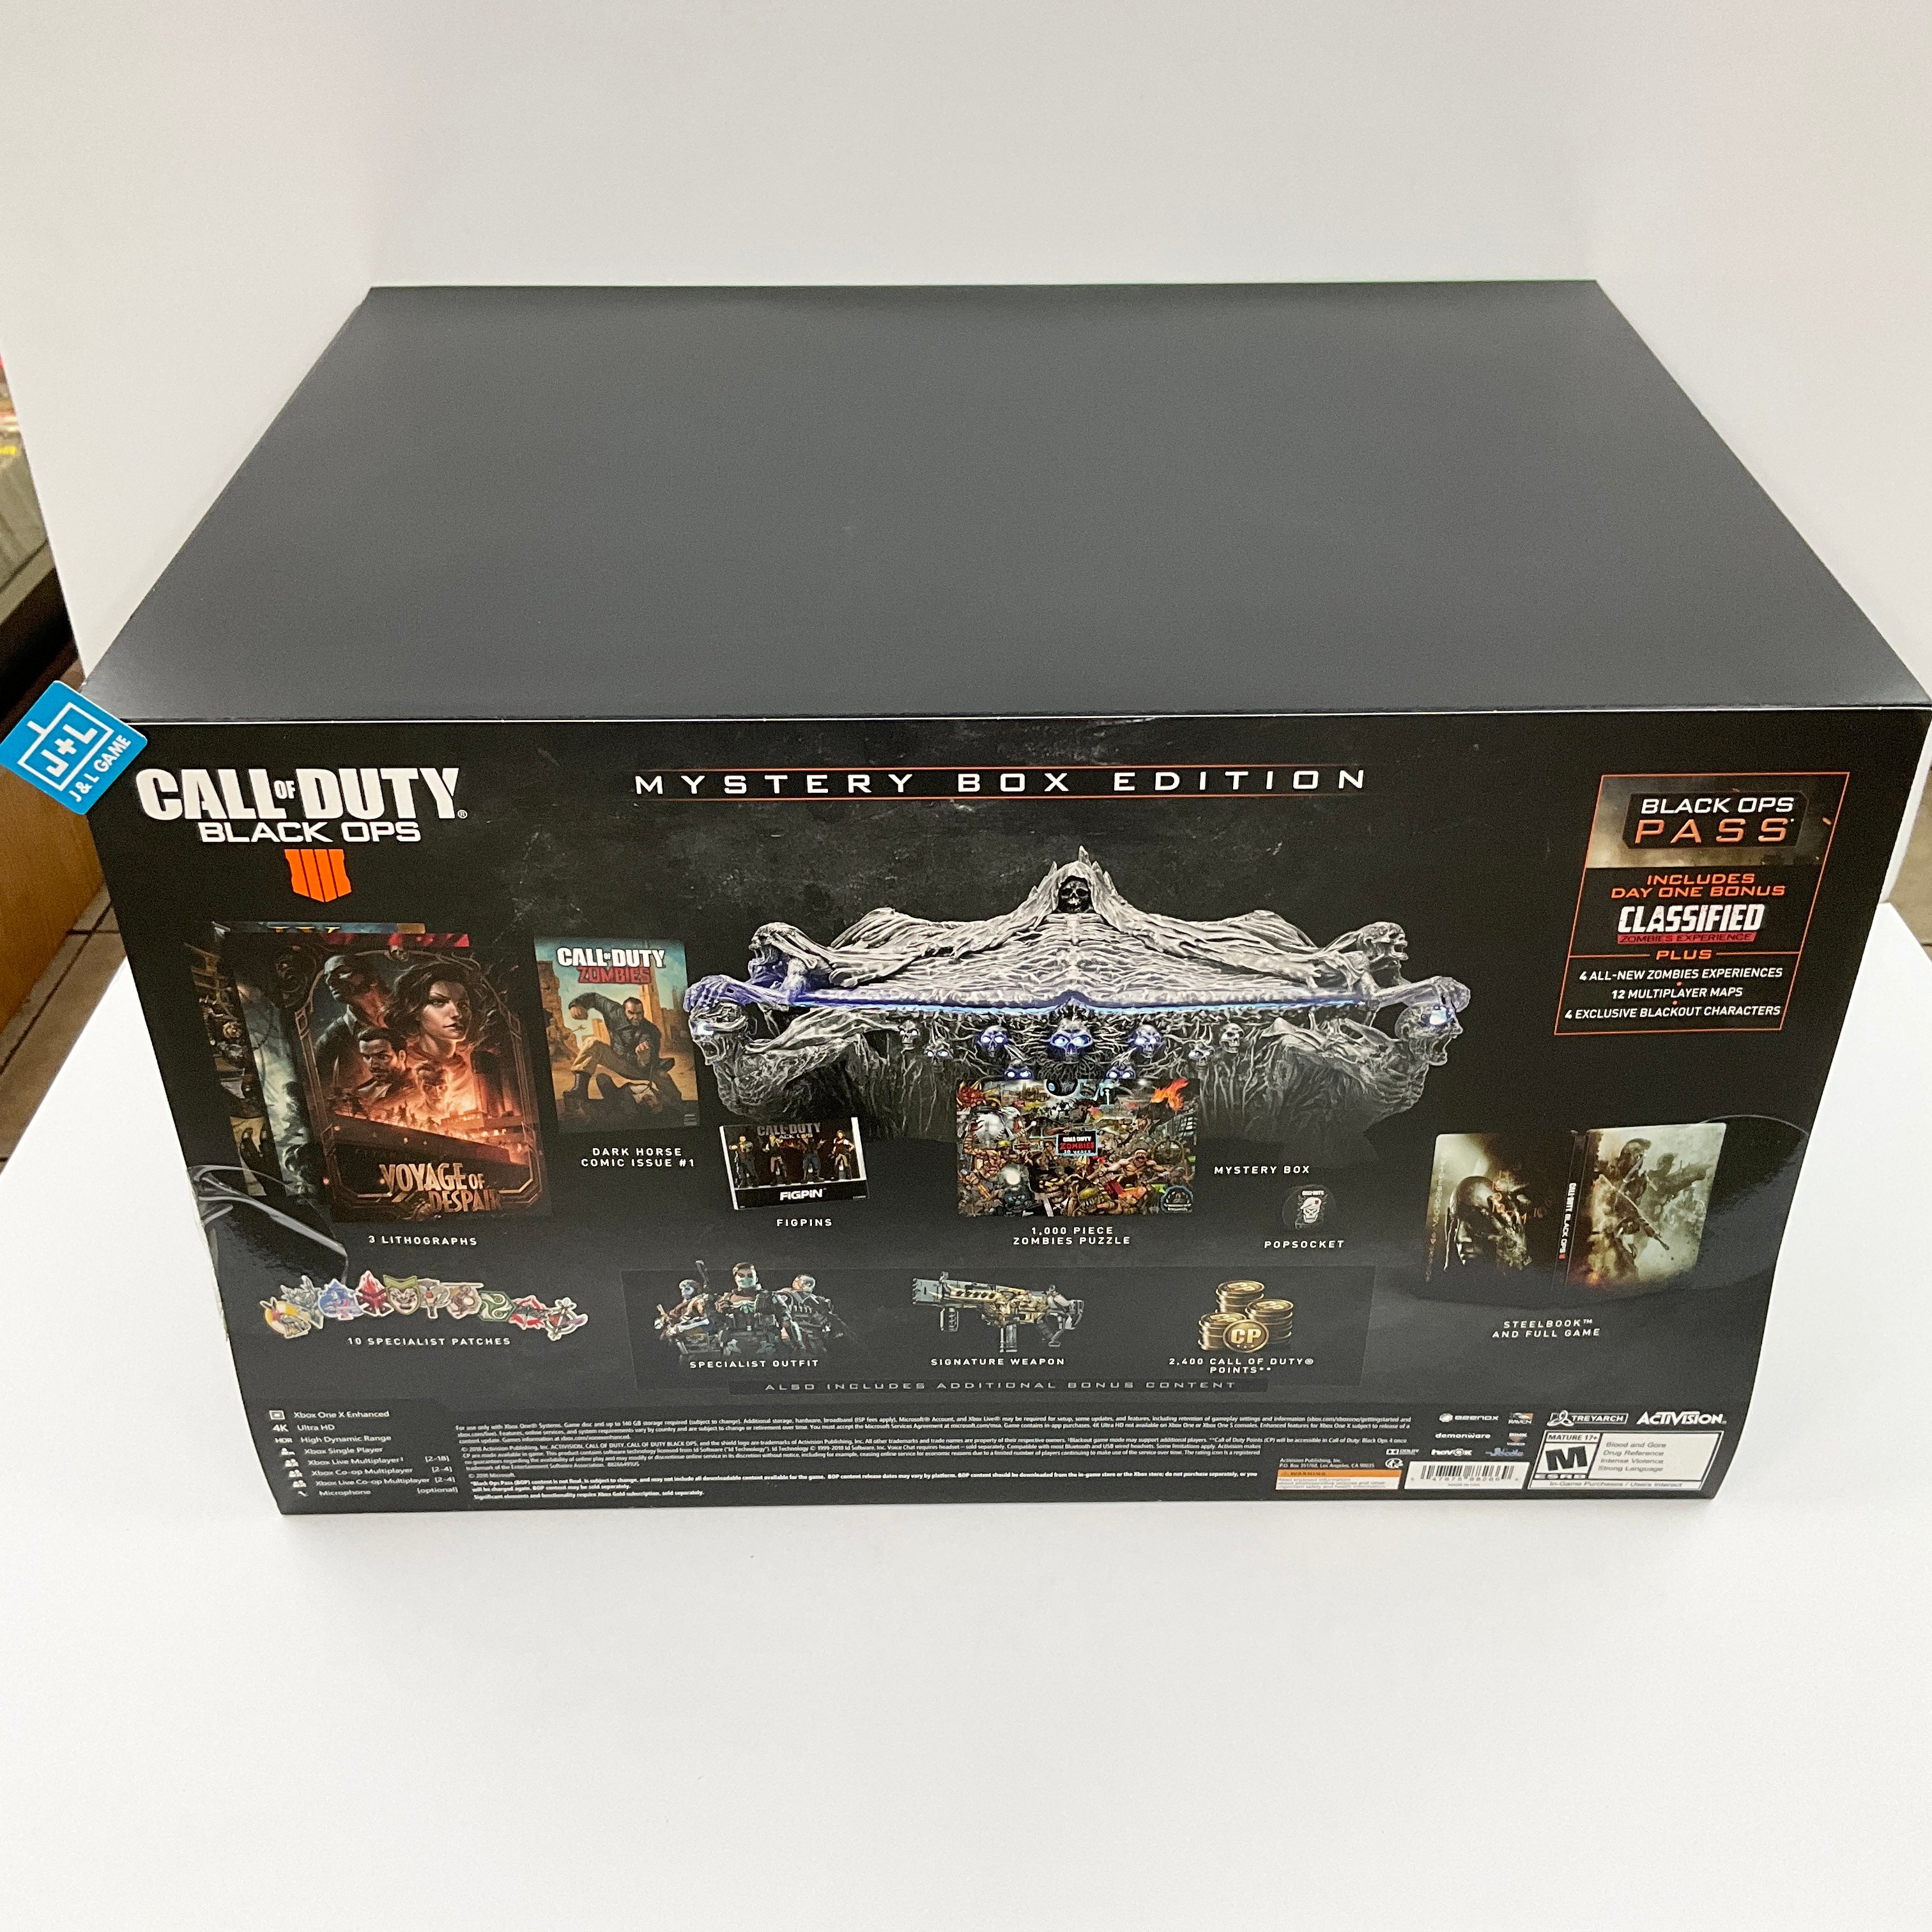 Call of Duty: Black Ops IIII (Mystery Box Edition) - (XB1) Xbox One Video Games Activision   